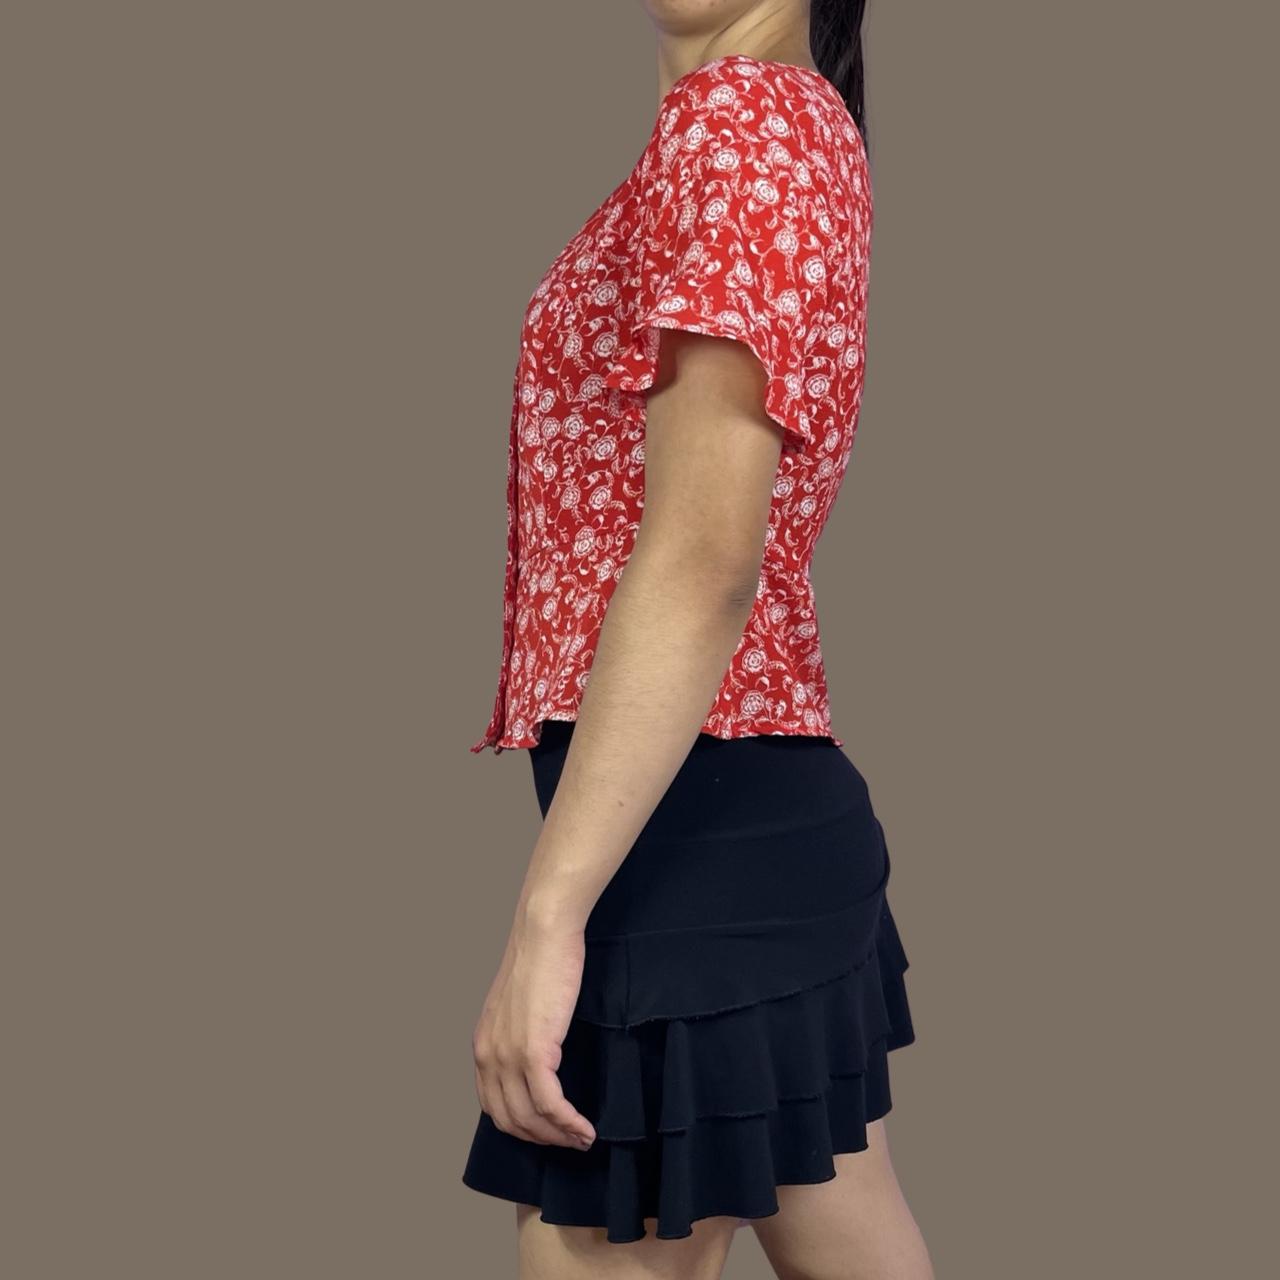 Product Image 2 - Red baby doll floral top.